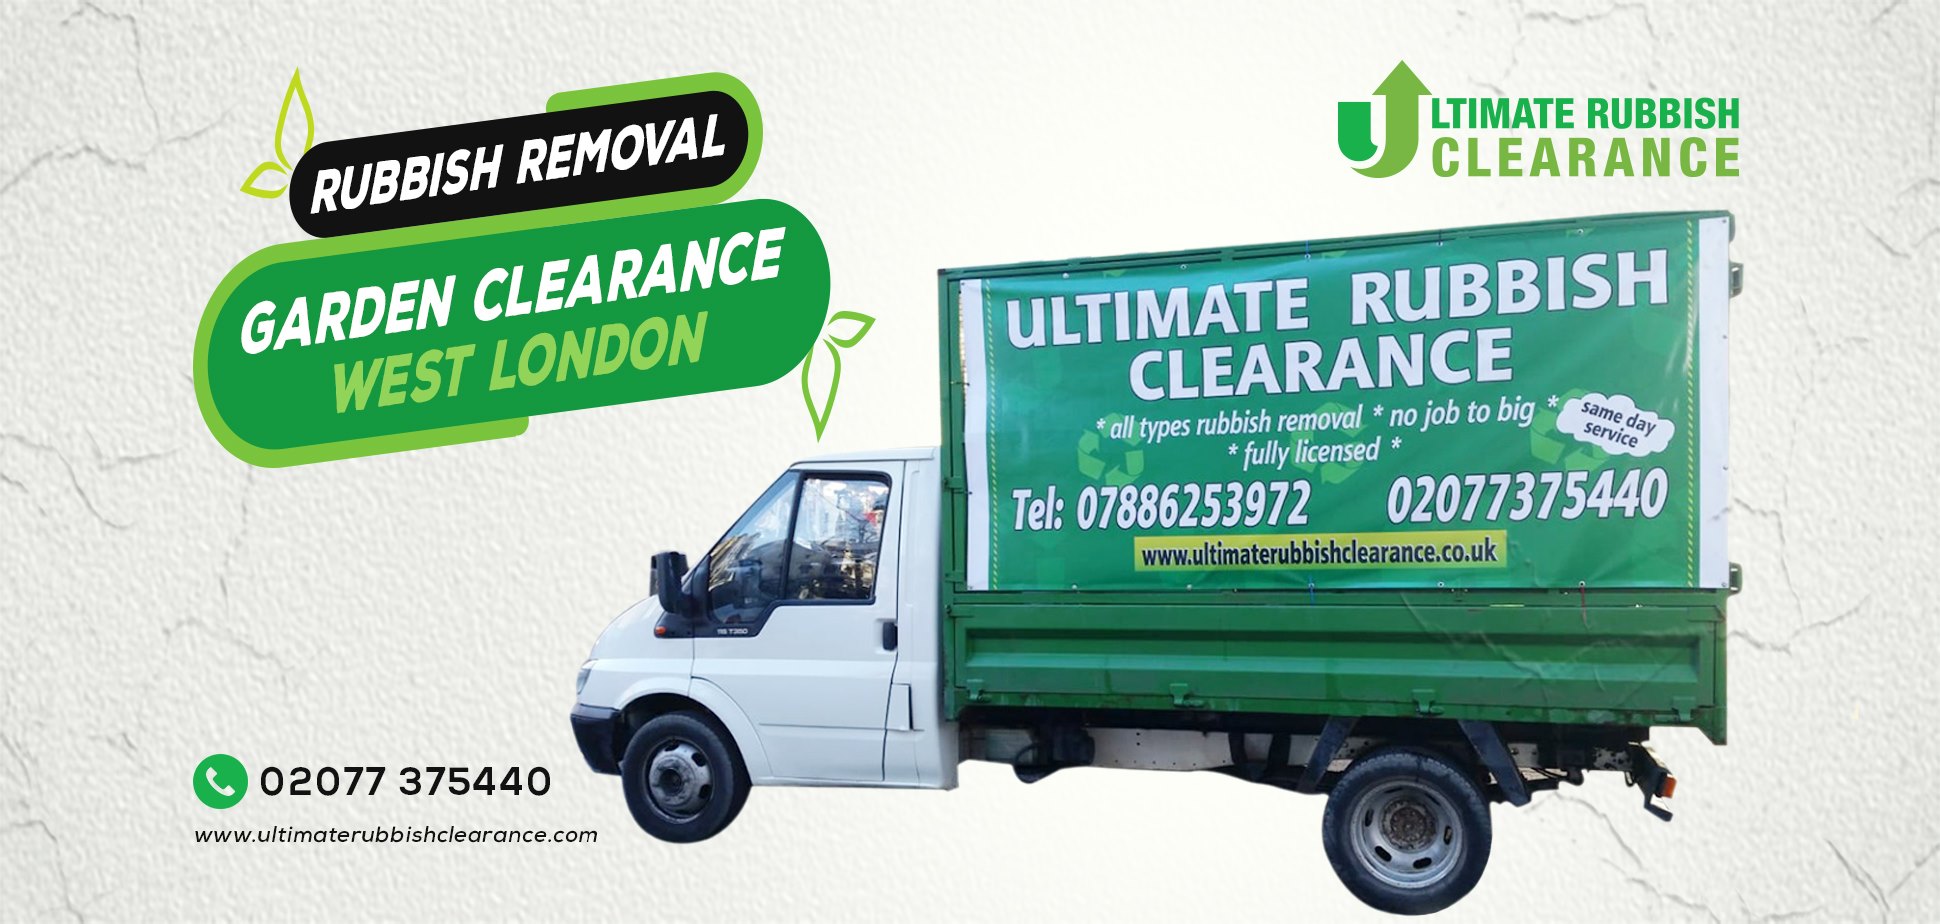 Main image for Ultimate Rubbish Clearance